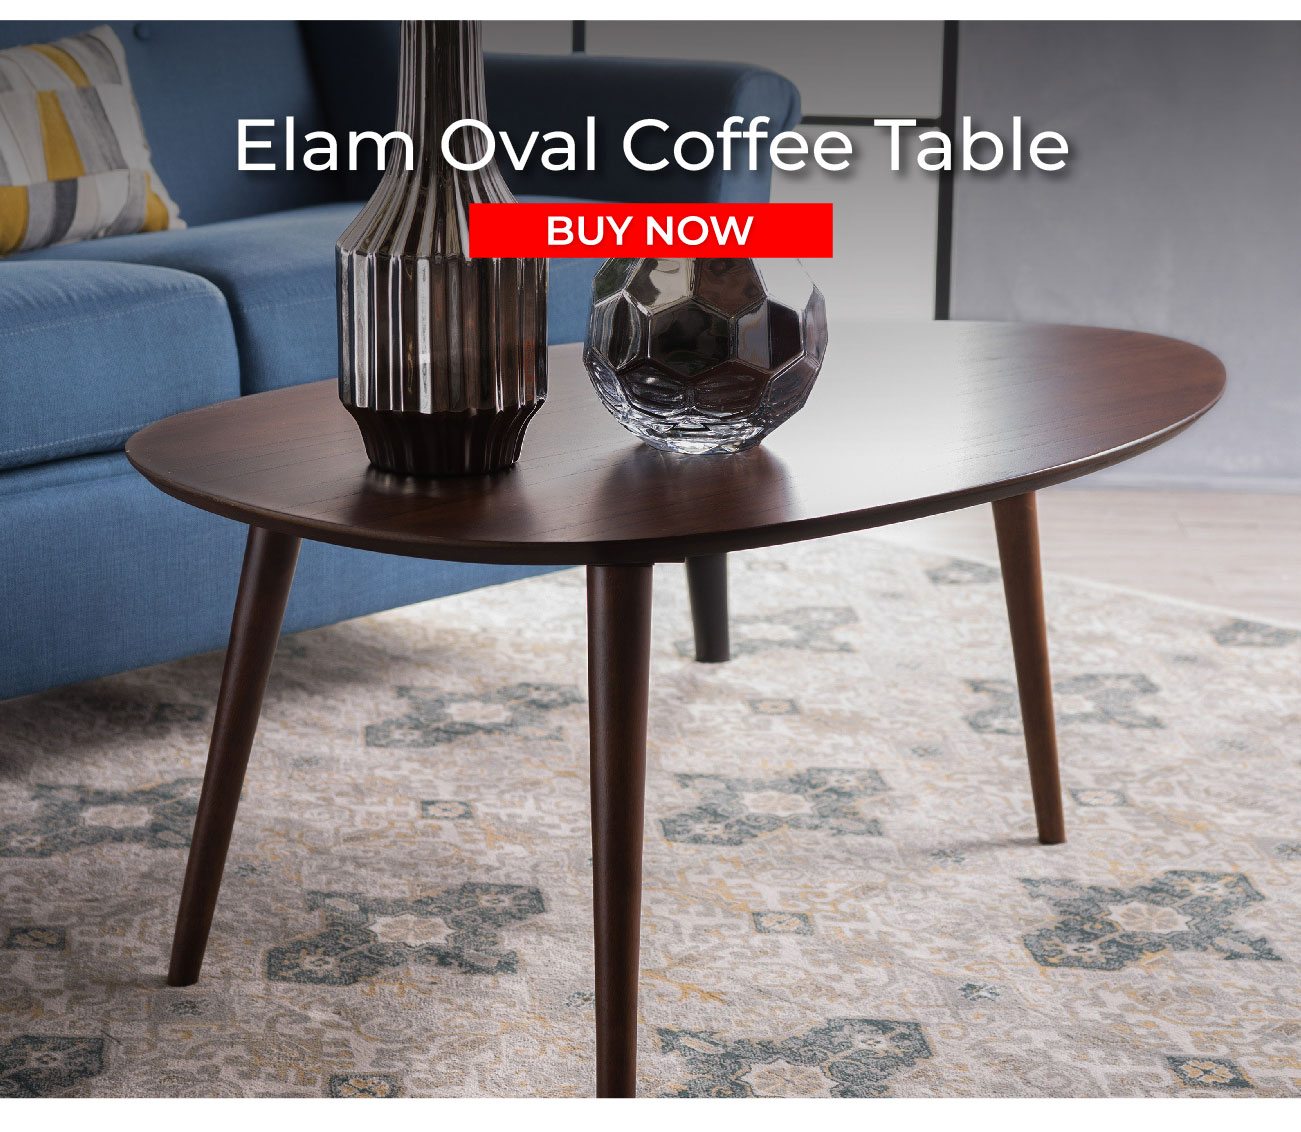 Elam Oval Coffee Table